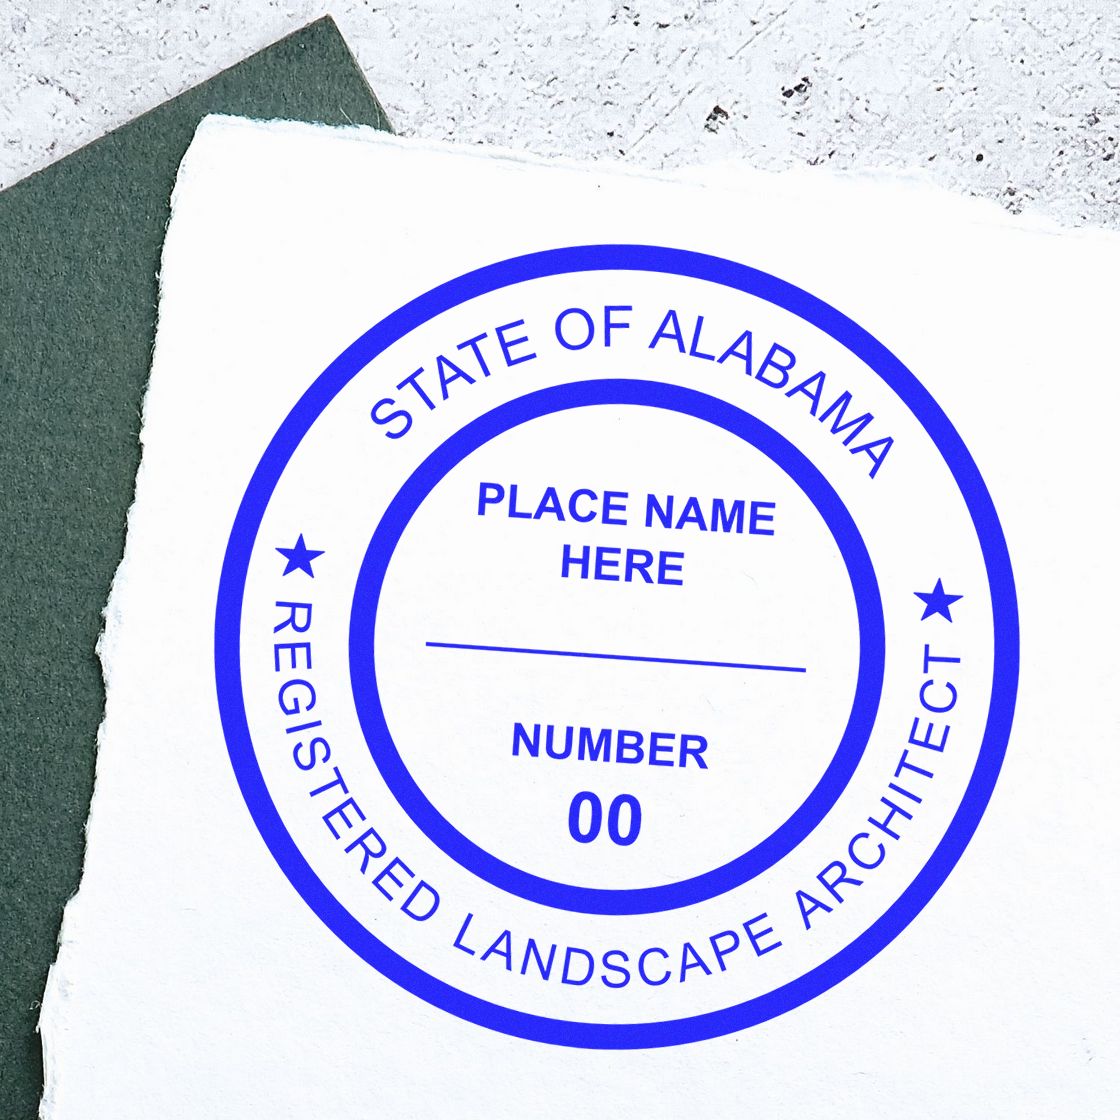 The Premium MaxLight Pre-Inked Alabama Landscape Architectural Stamp stamp impression comes to life with a crisp, detailed photo on paper - showcasing true professional quality.